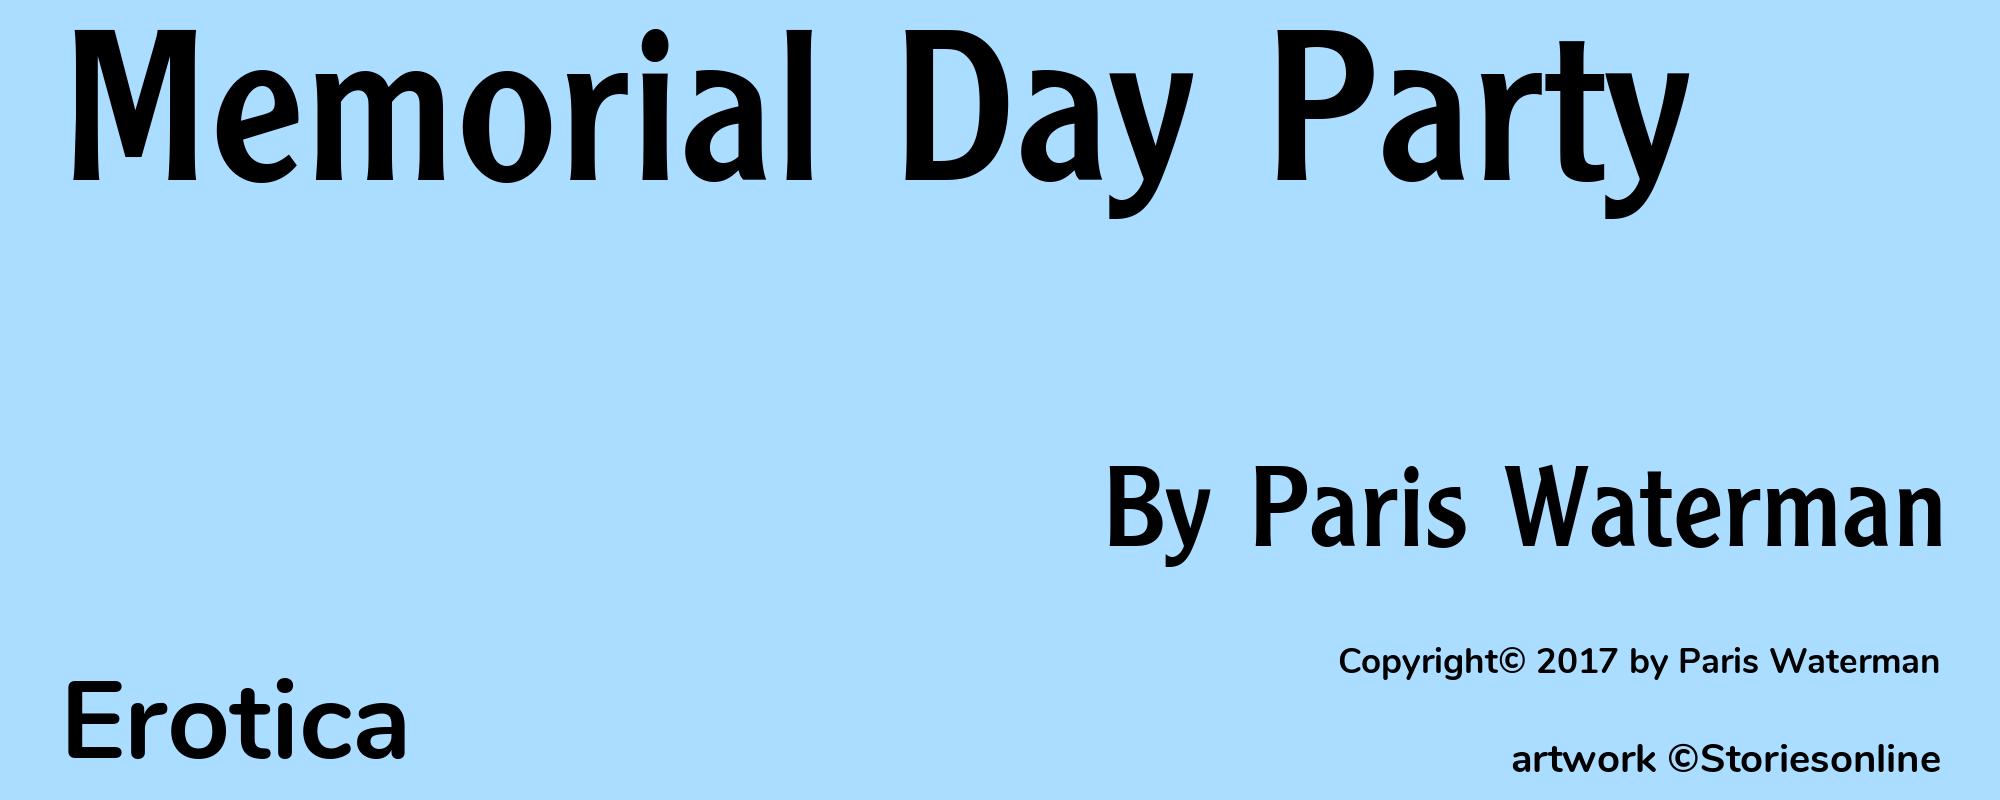 Memorial Day Party - Cover